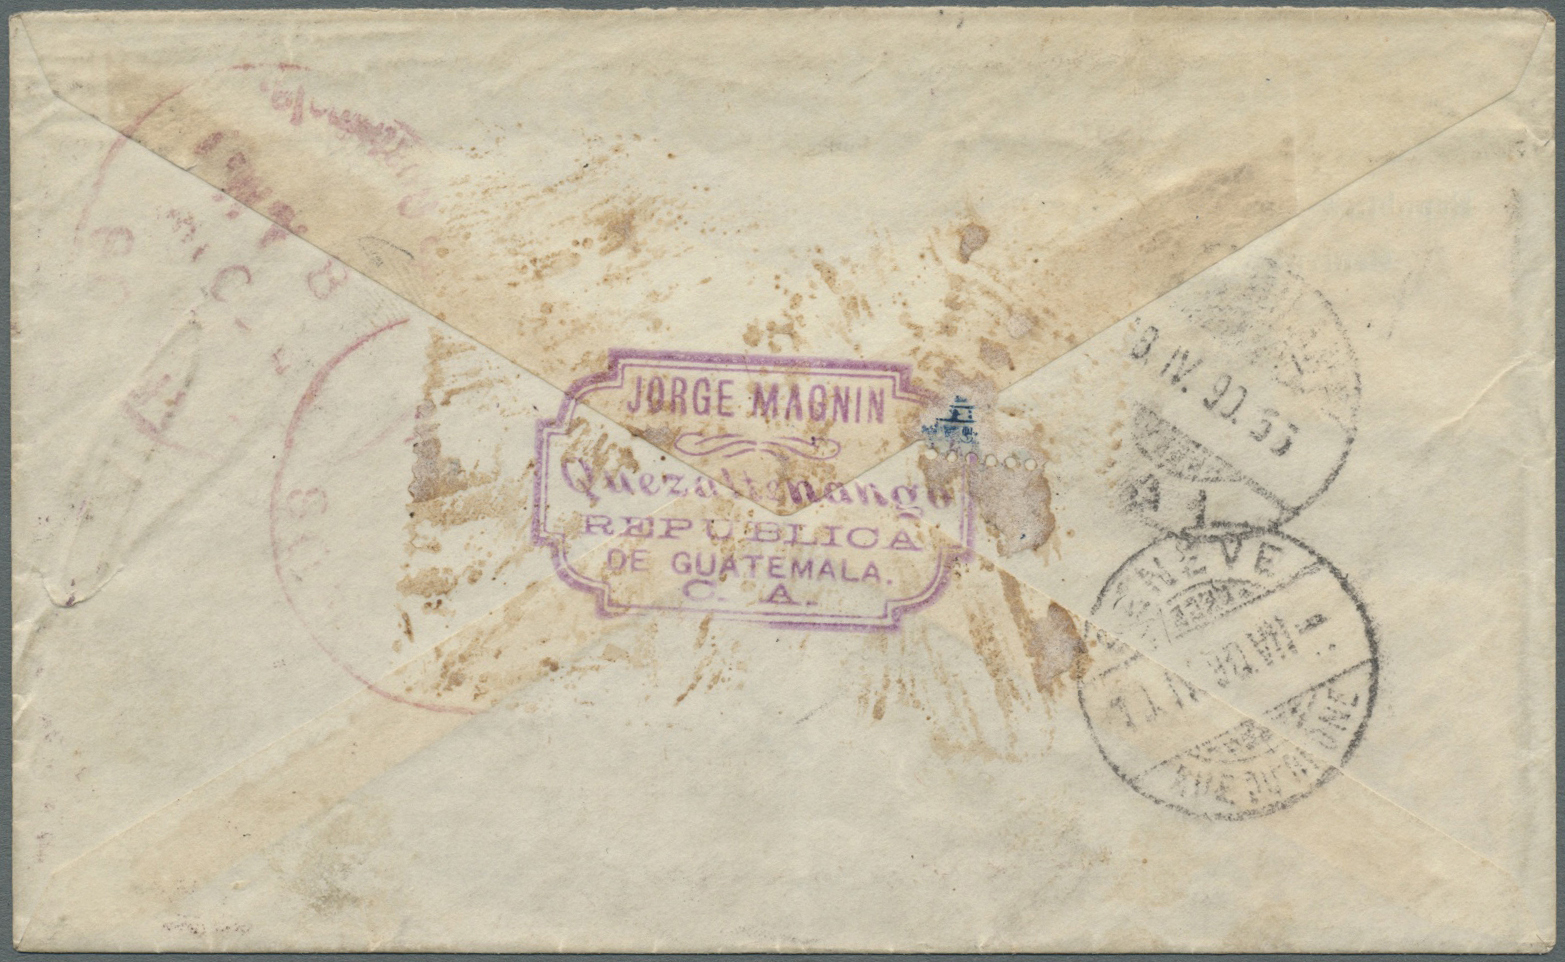 Br Guatemala: 1890. Envelope Addressed To Switzerland Bearing Yvert 34, 5c Violet Tied By Dotted Obliterator With Adjace - Guatemala